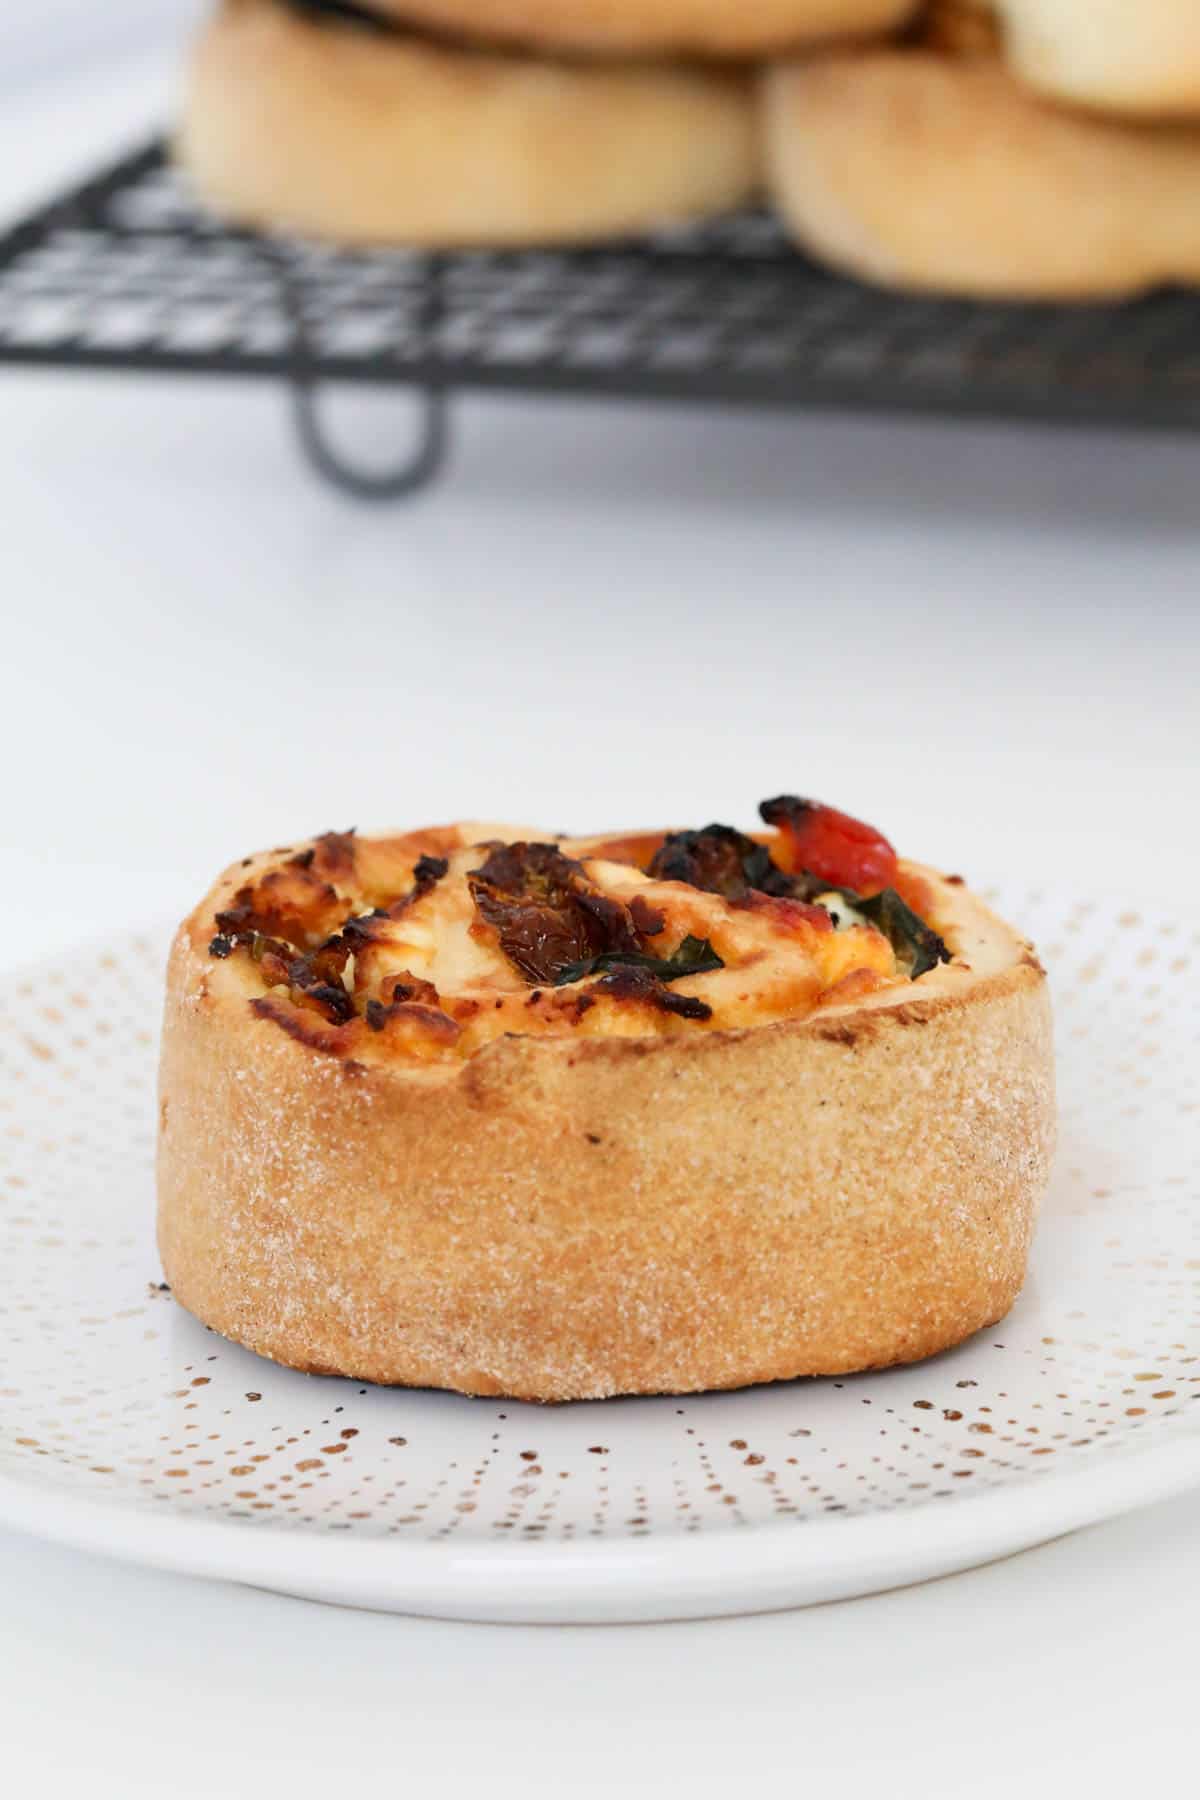 A crunchy oven baked scroll.